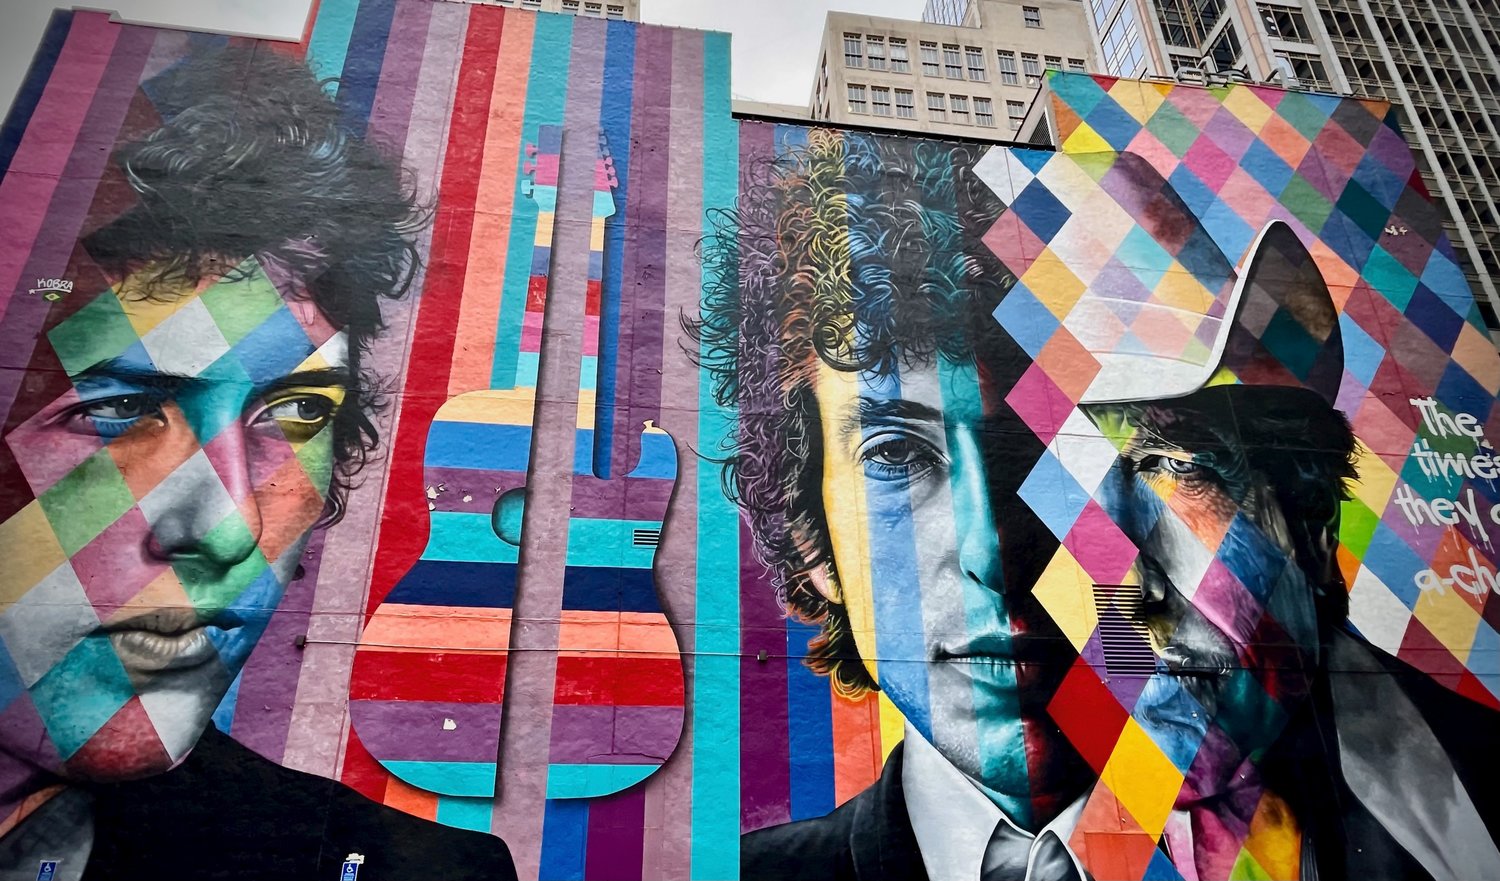 The soaring Bob Dylan mural attracts international visitors to downtown Minneapolis. (Photo by Susan Schaefer)